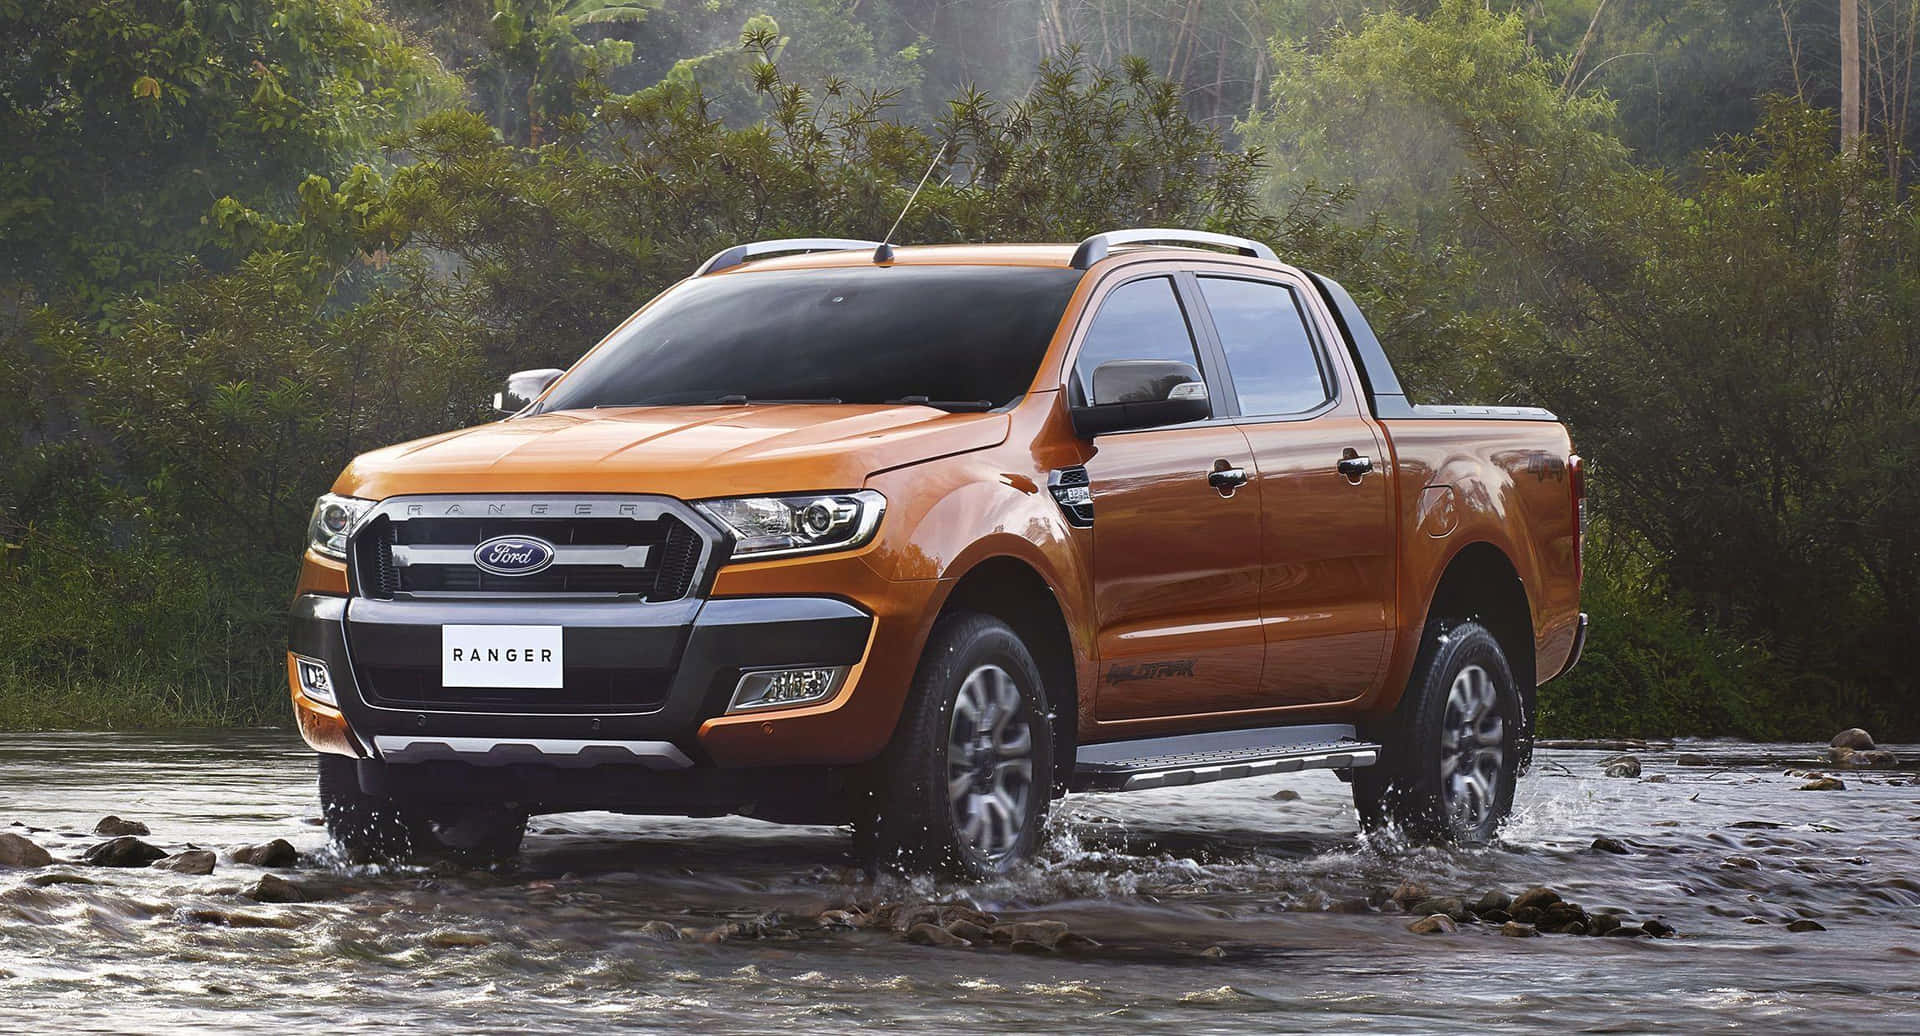 Powerful Ford Ranger in Action Wallpaper